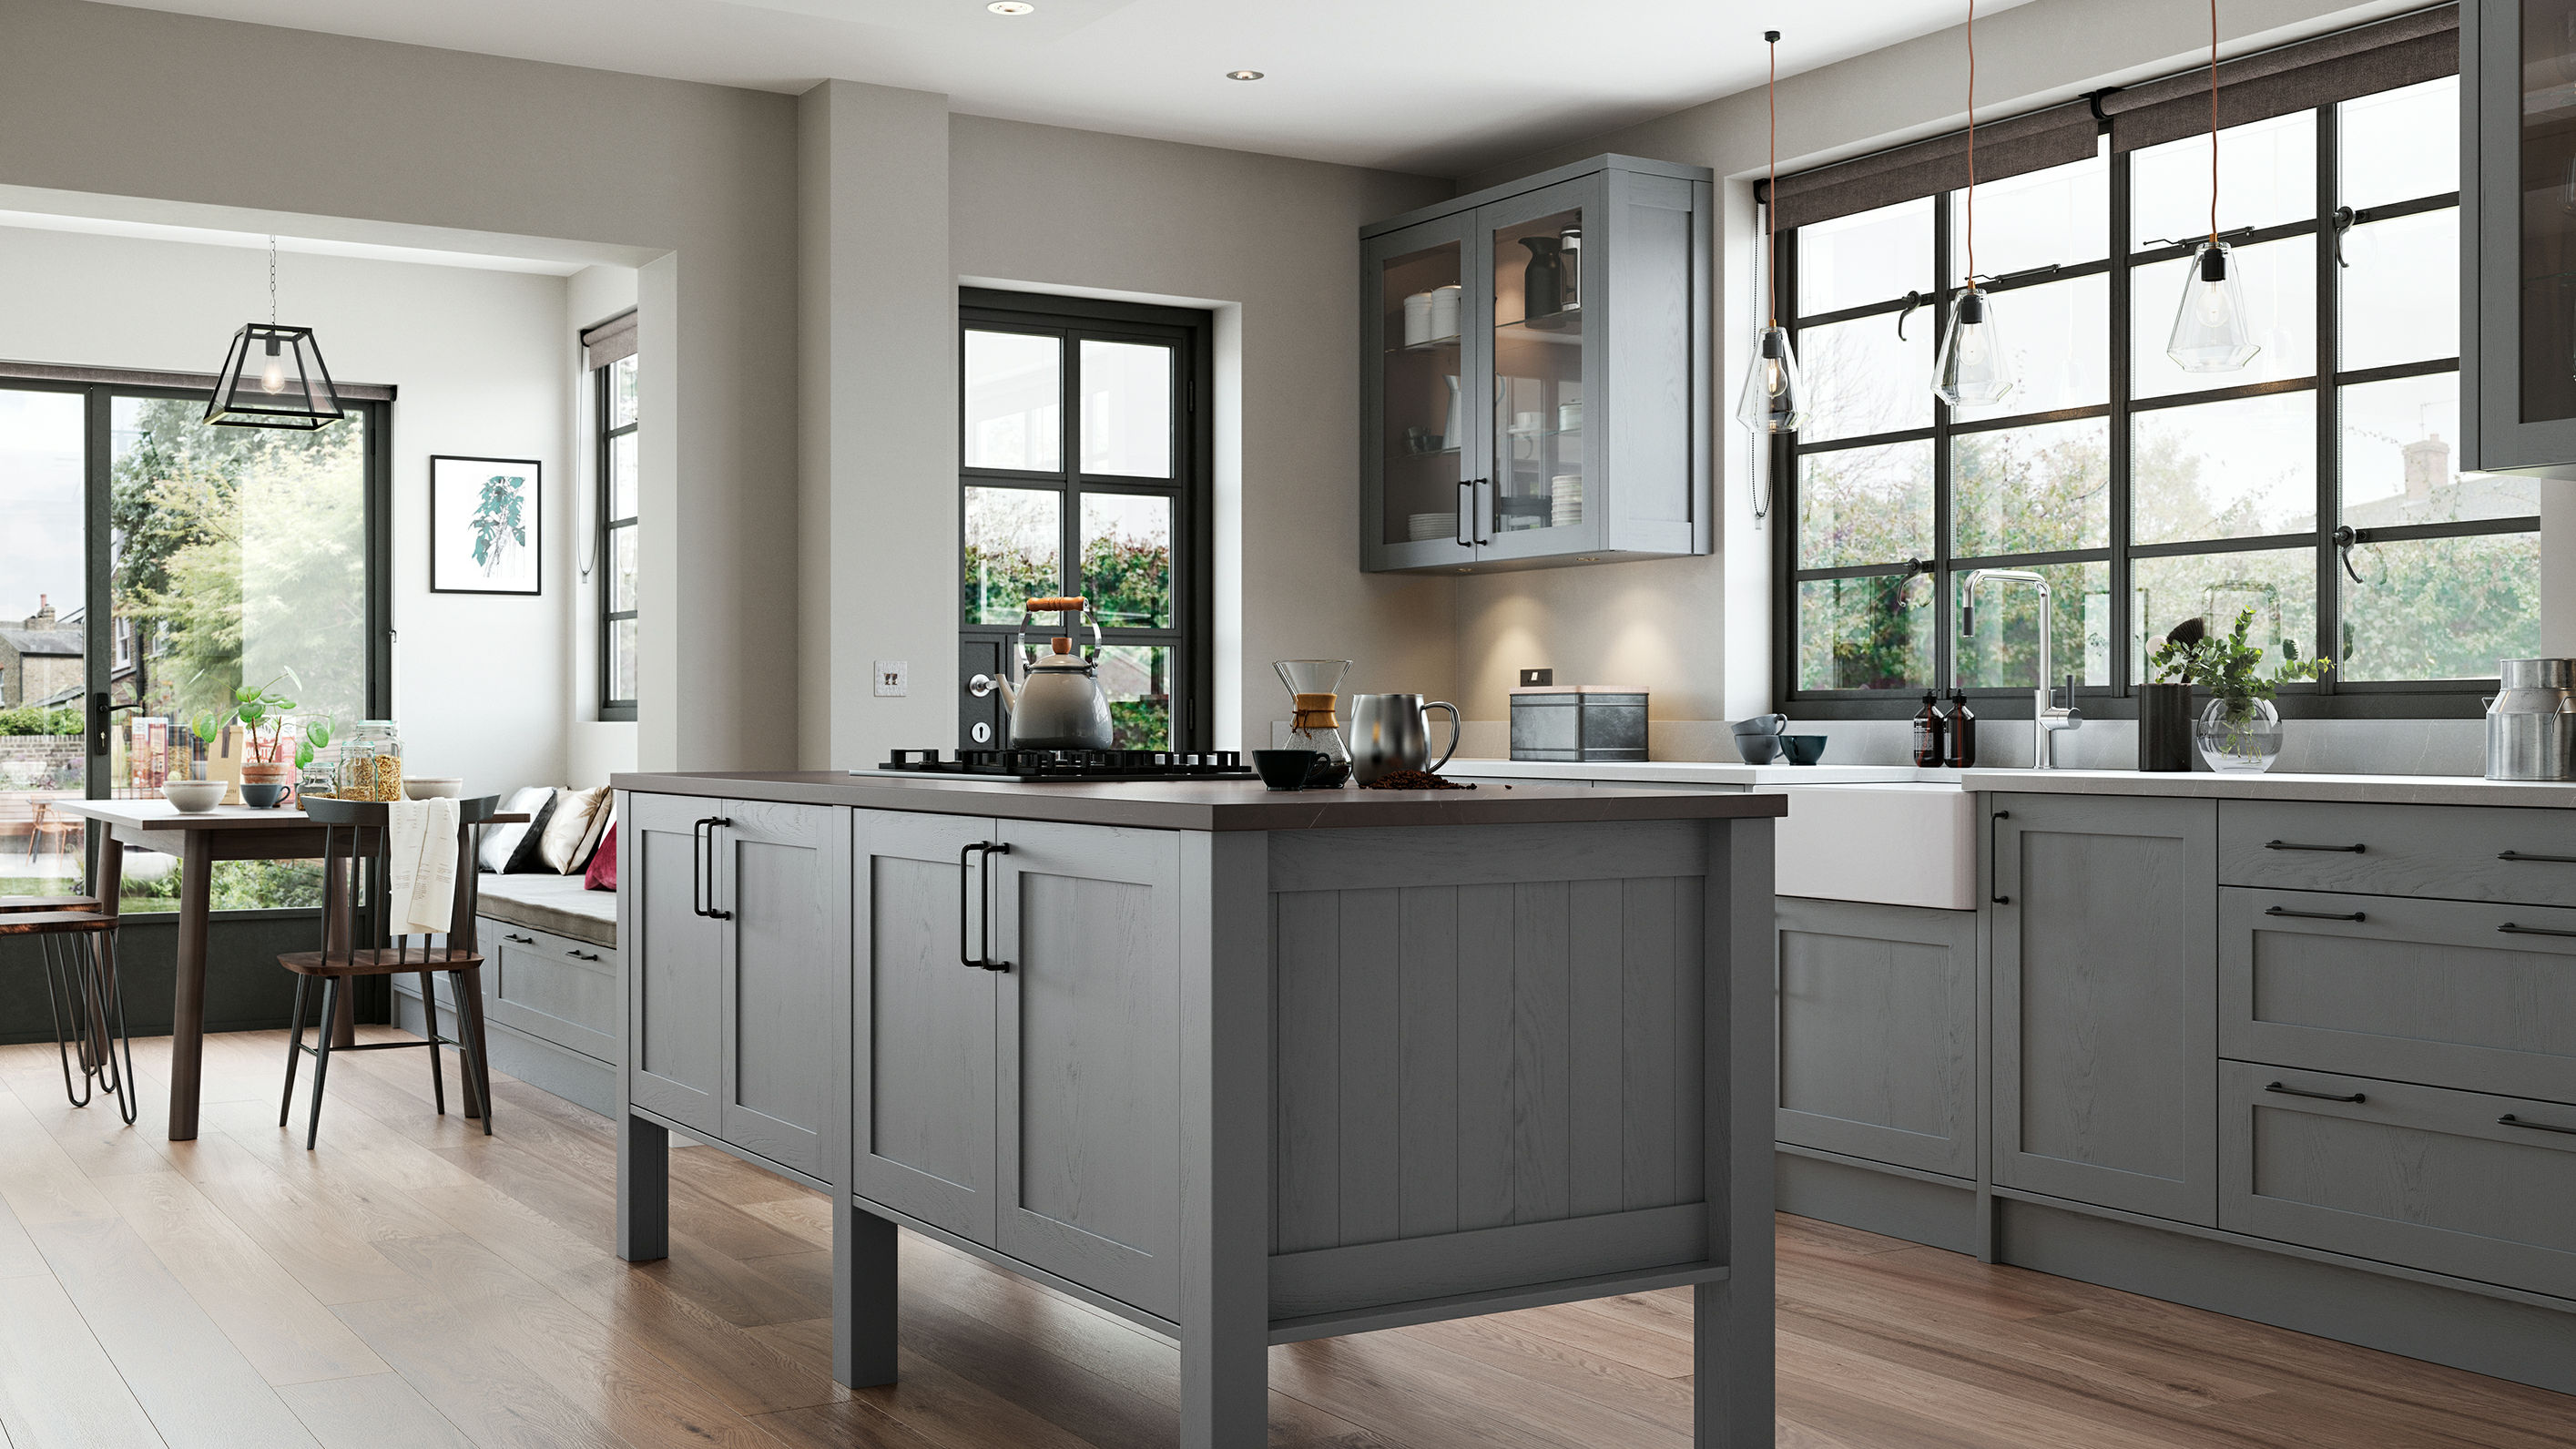 Aldana solid wood dust grey kitchens with exceptional craftsmanship and a stylish, muted grey finish